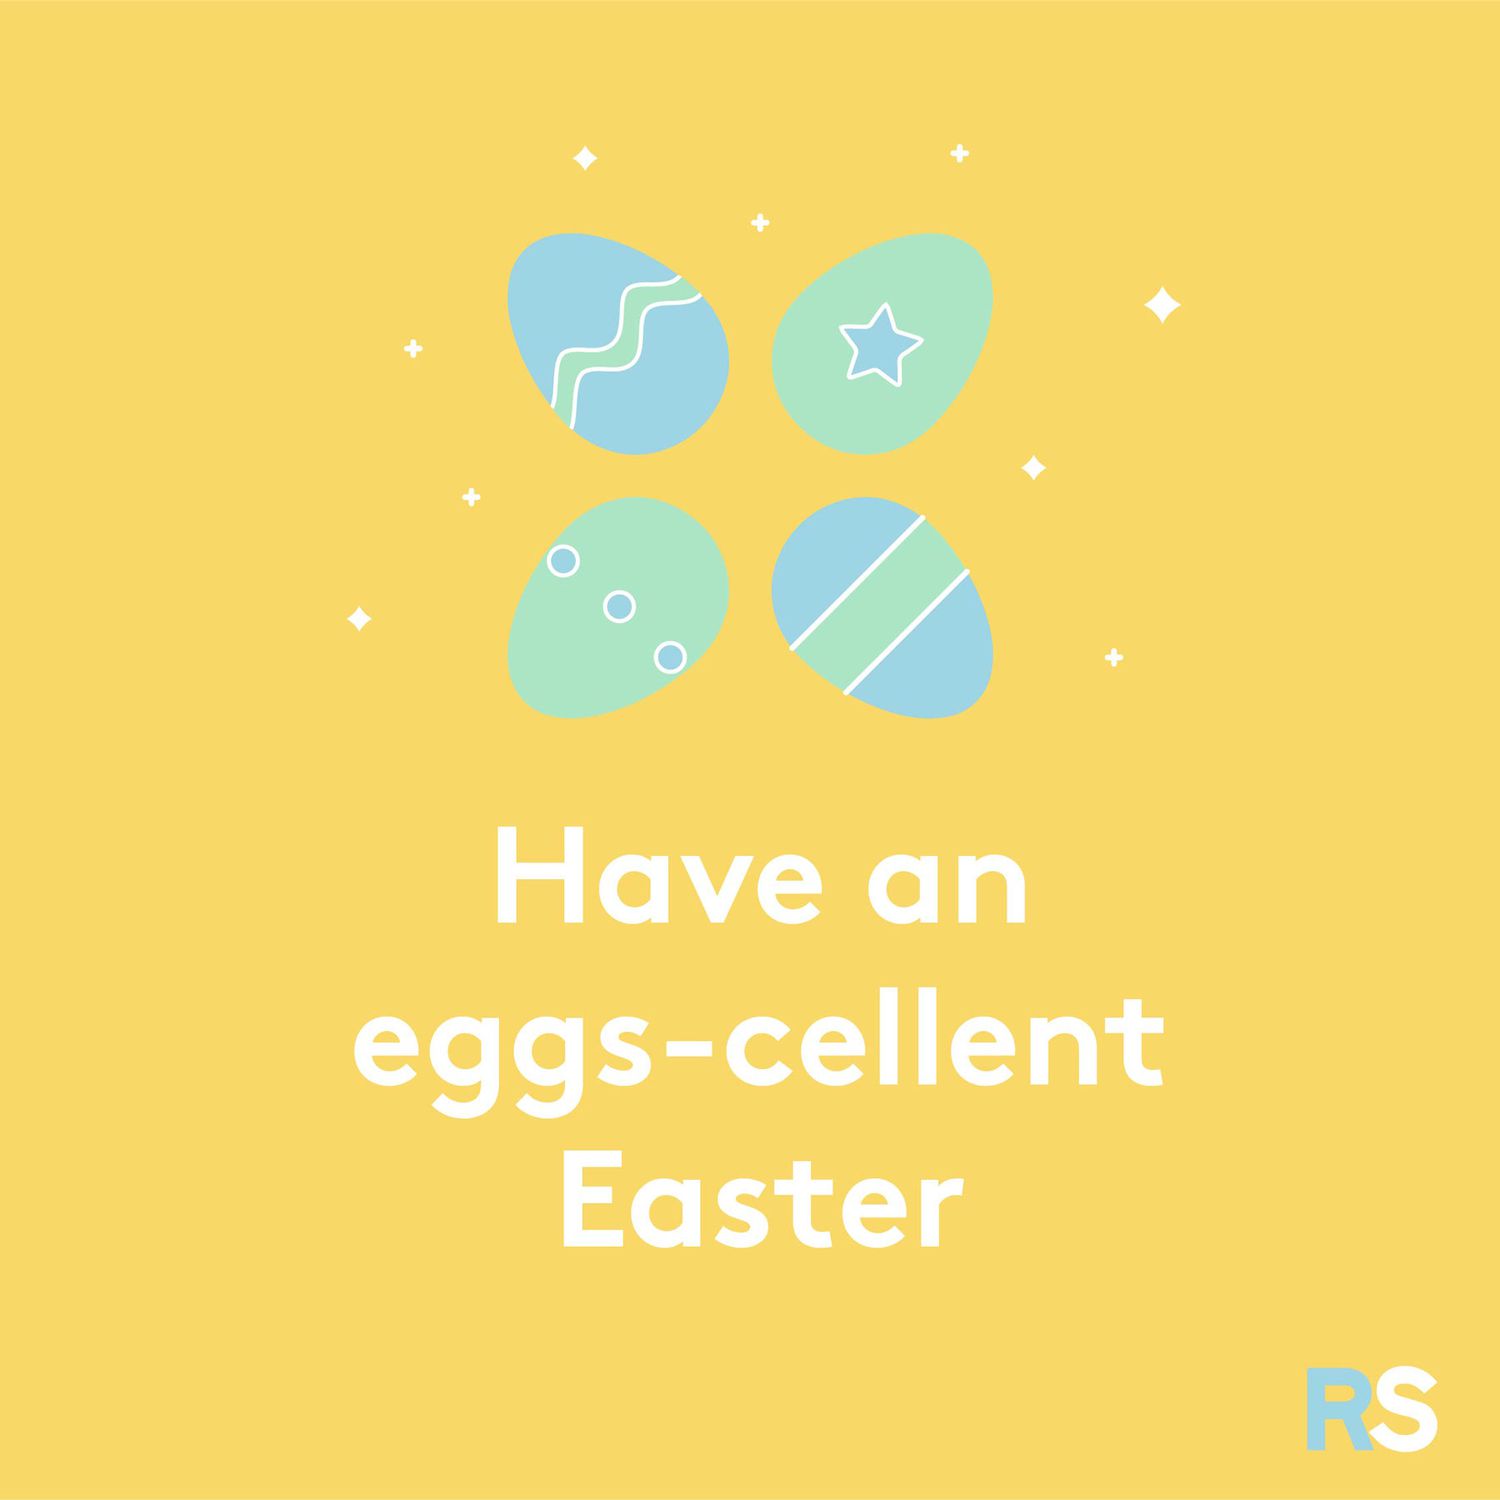 Have an eggs-cellent Easter